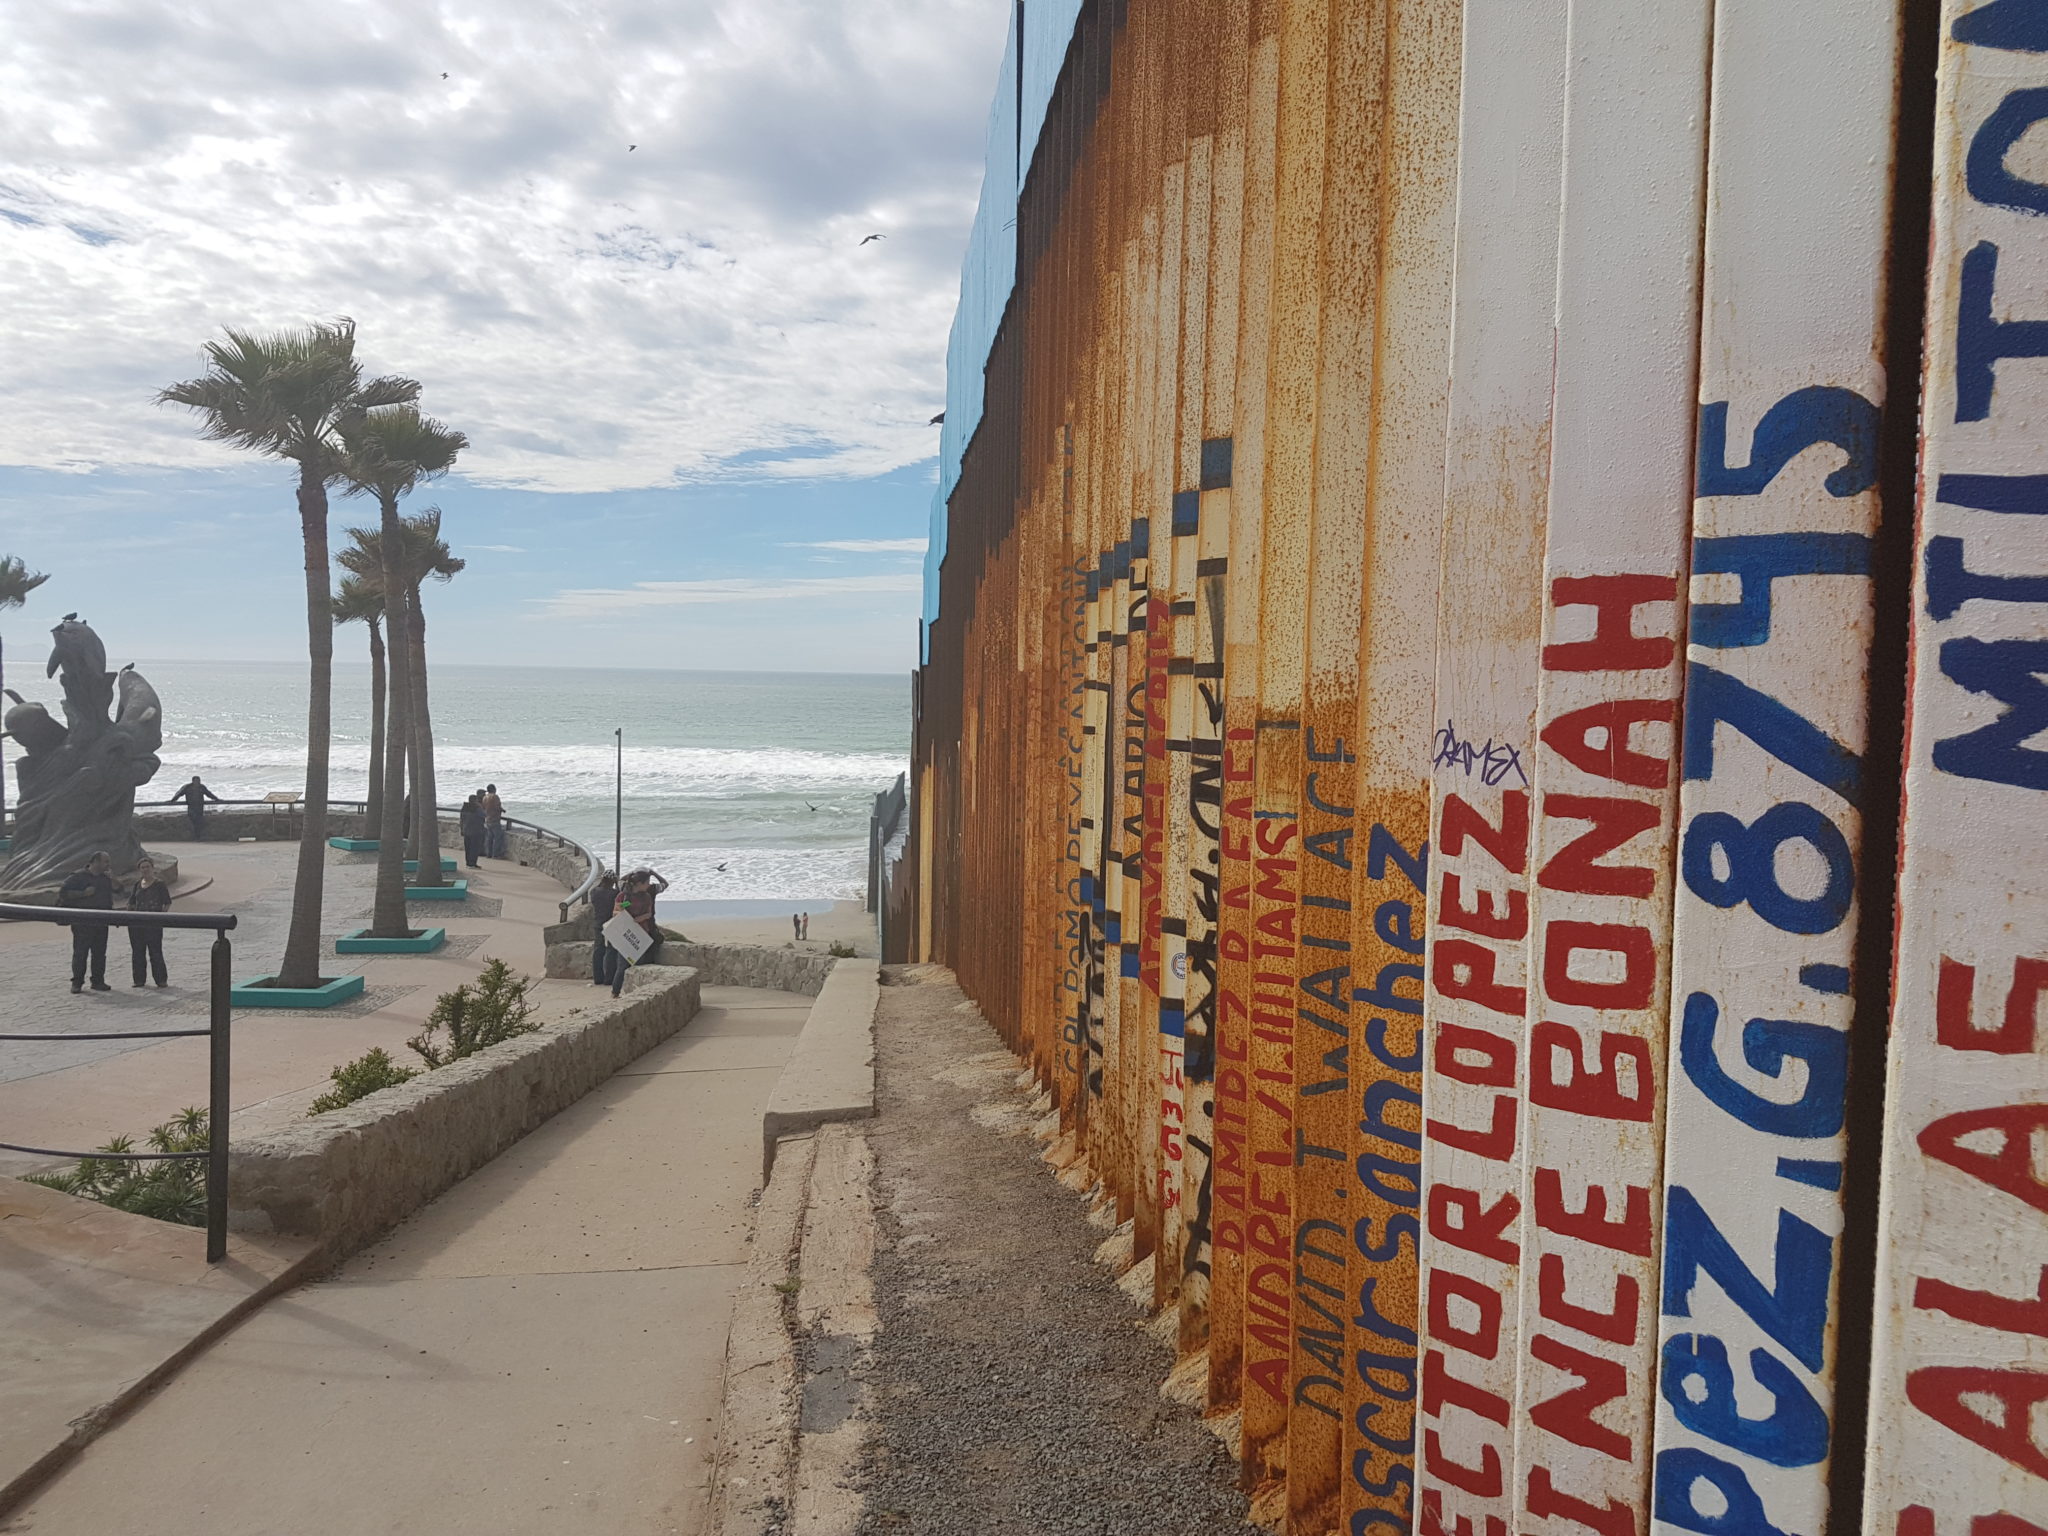 USA-Mexico border: ‘We witnessed the eerie calm before the storm’